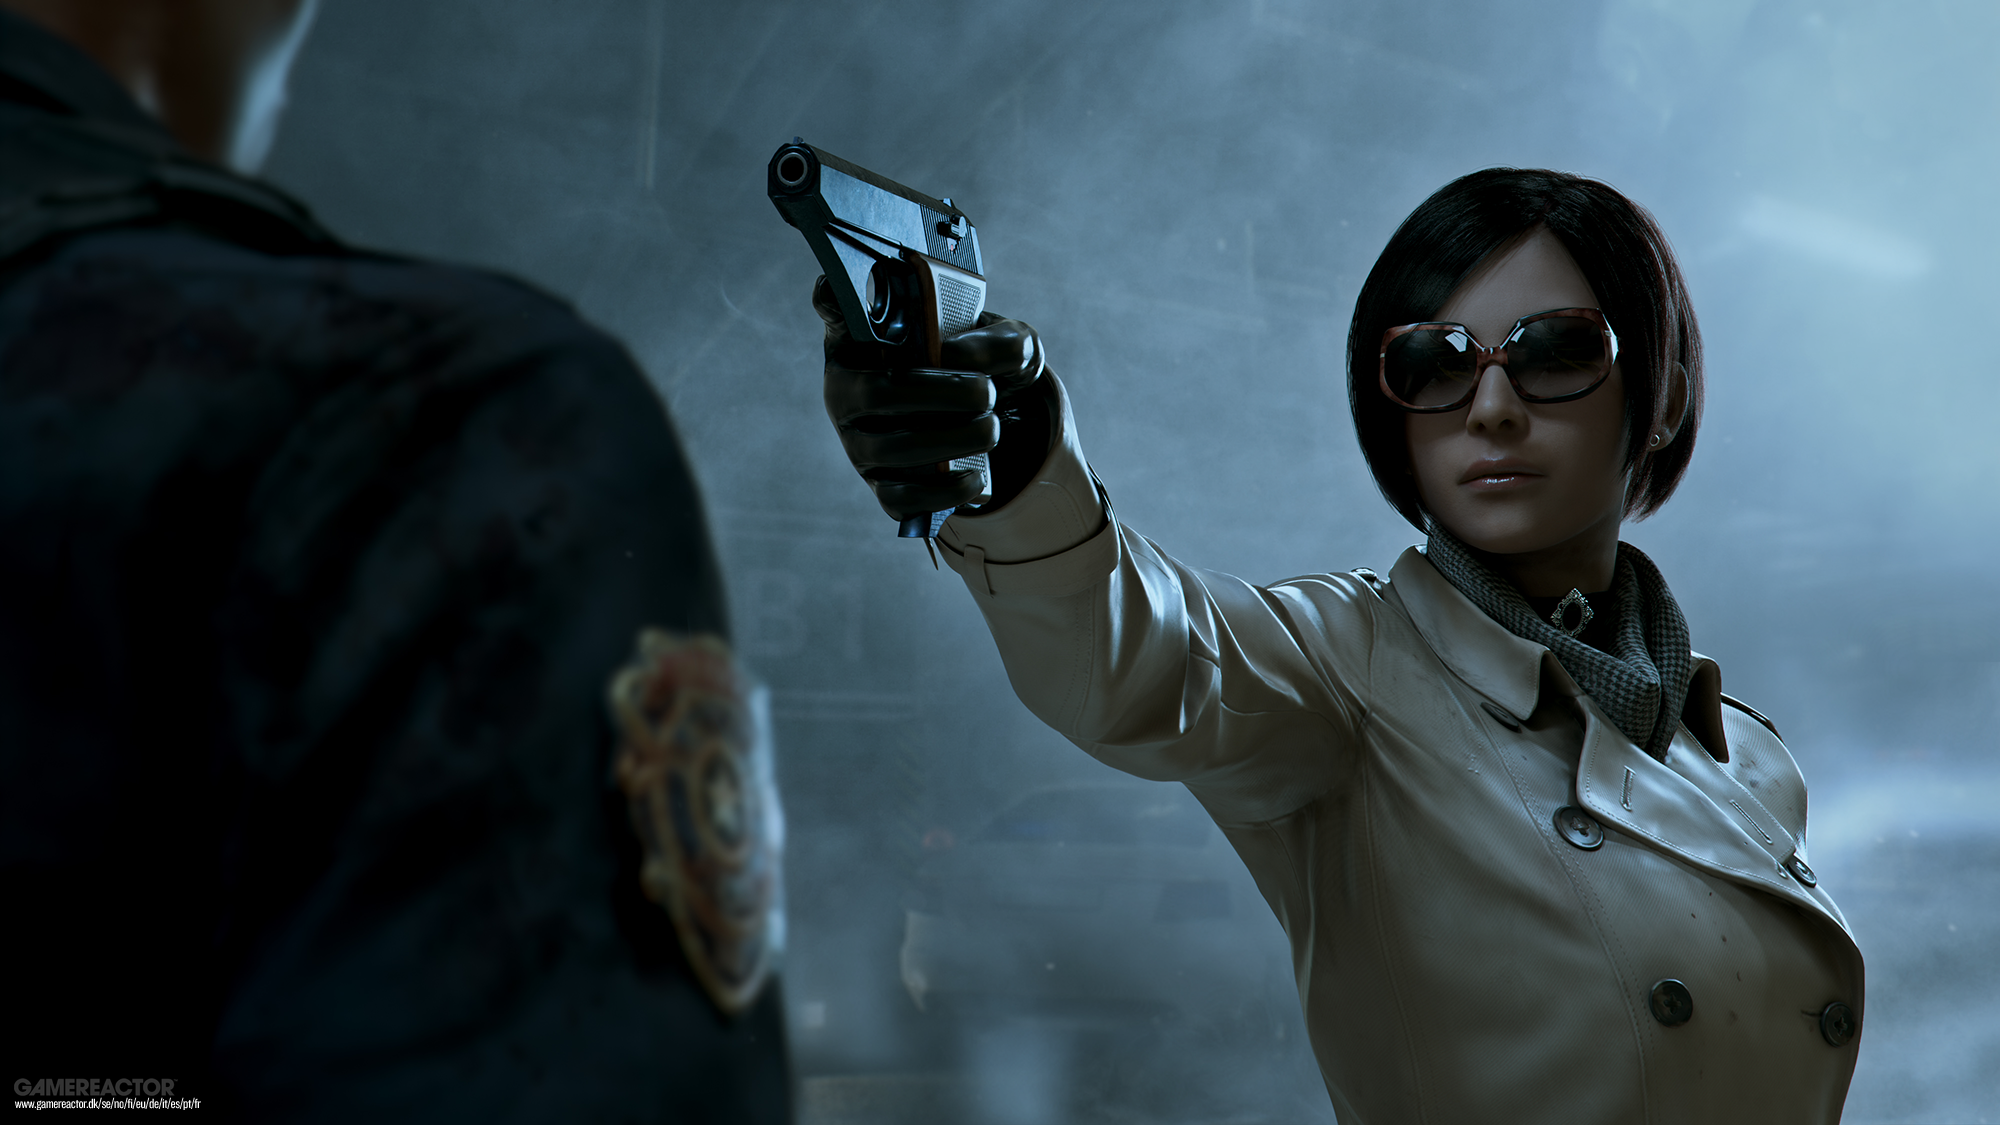 The actress who brings Ada Wong to life responds to criticism